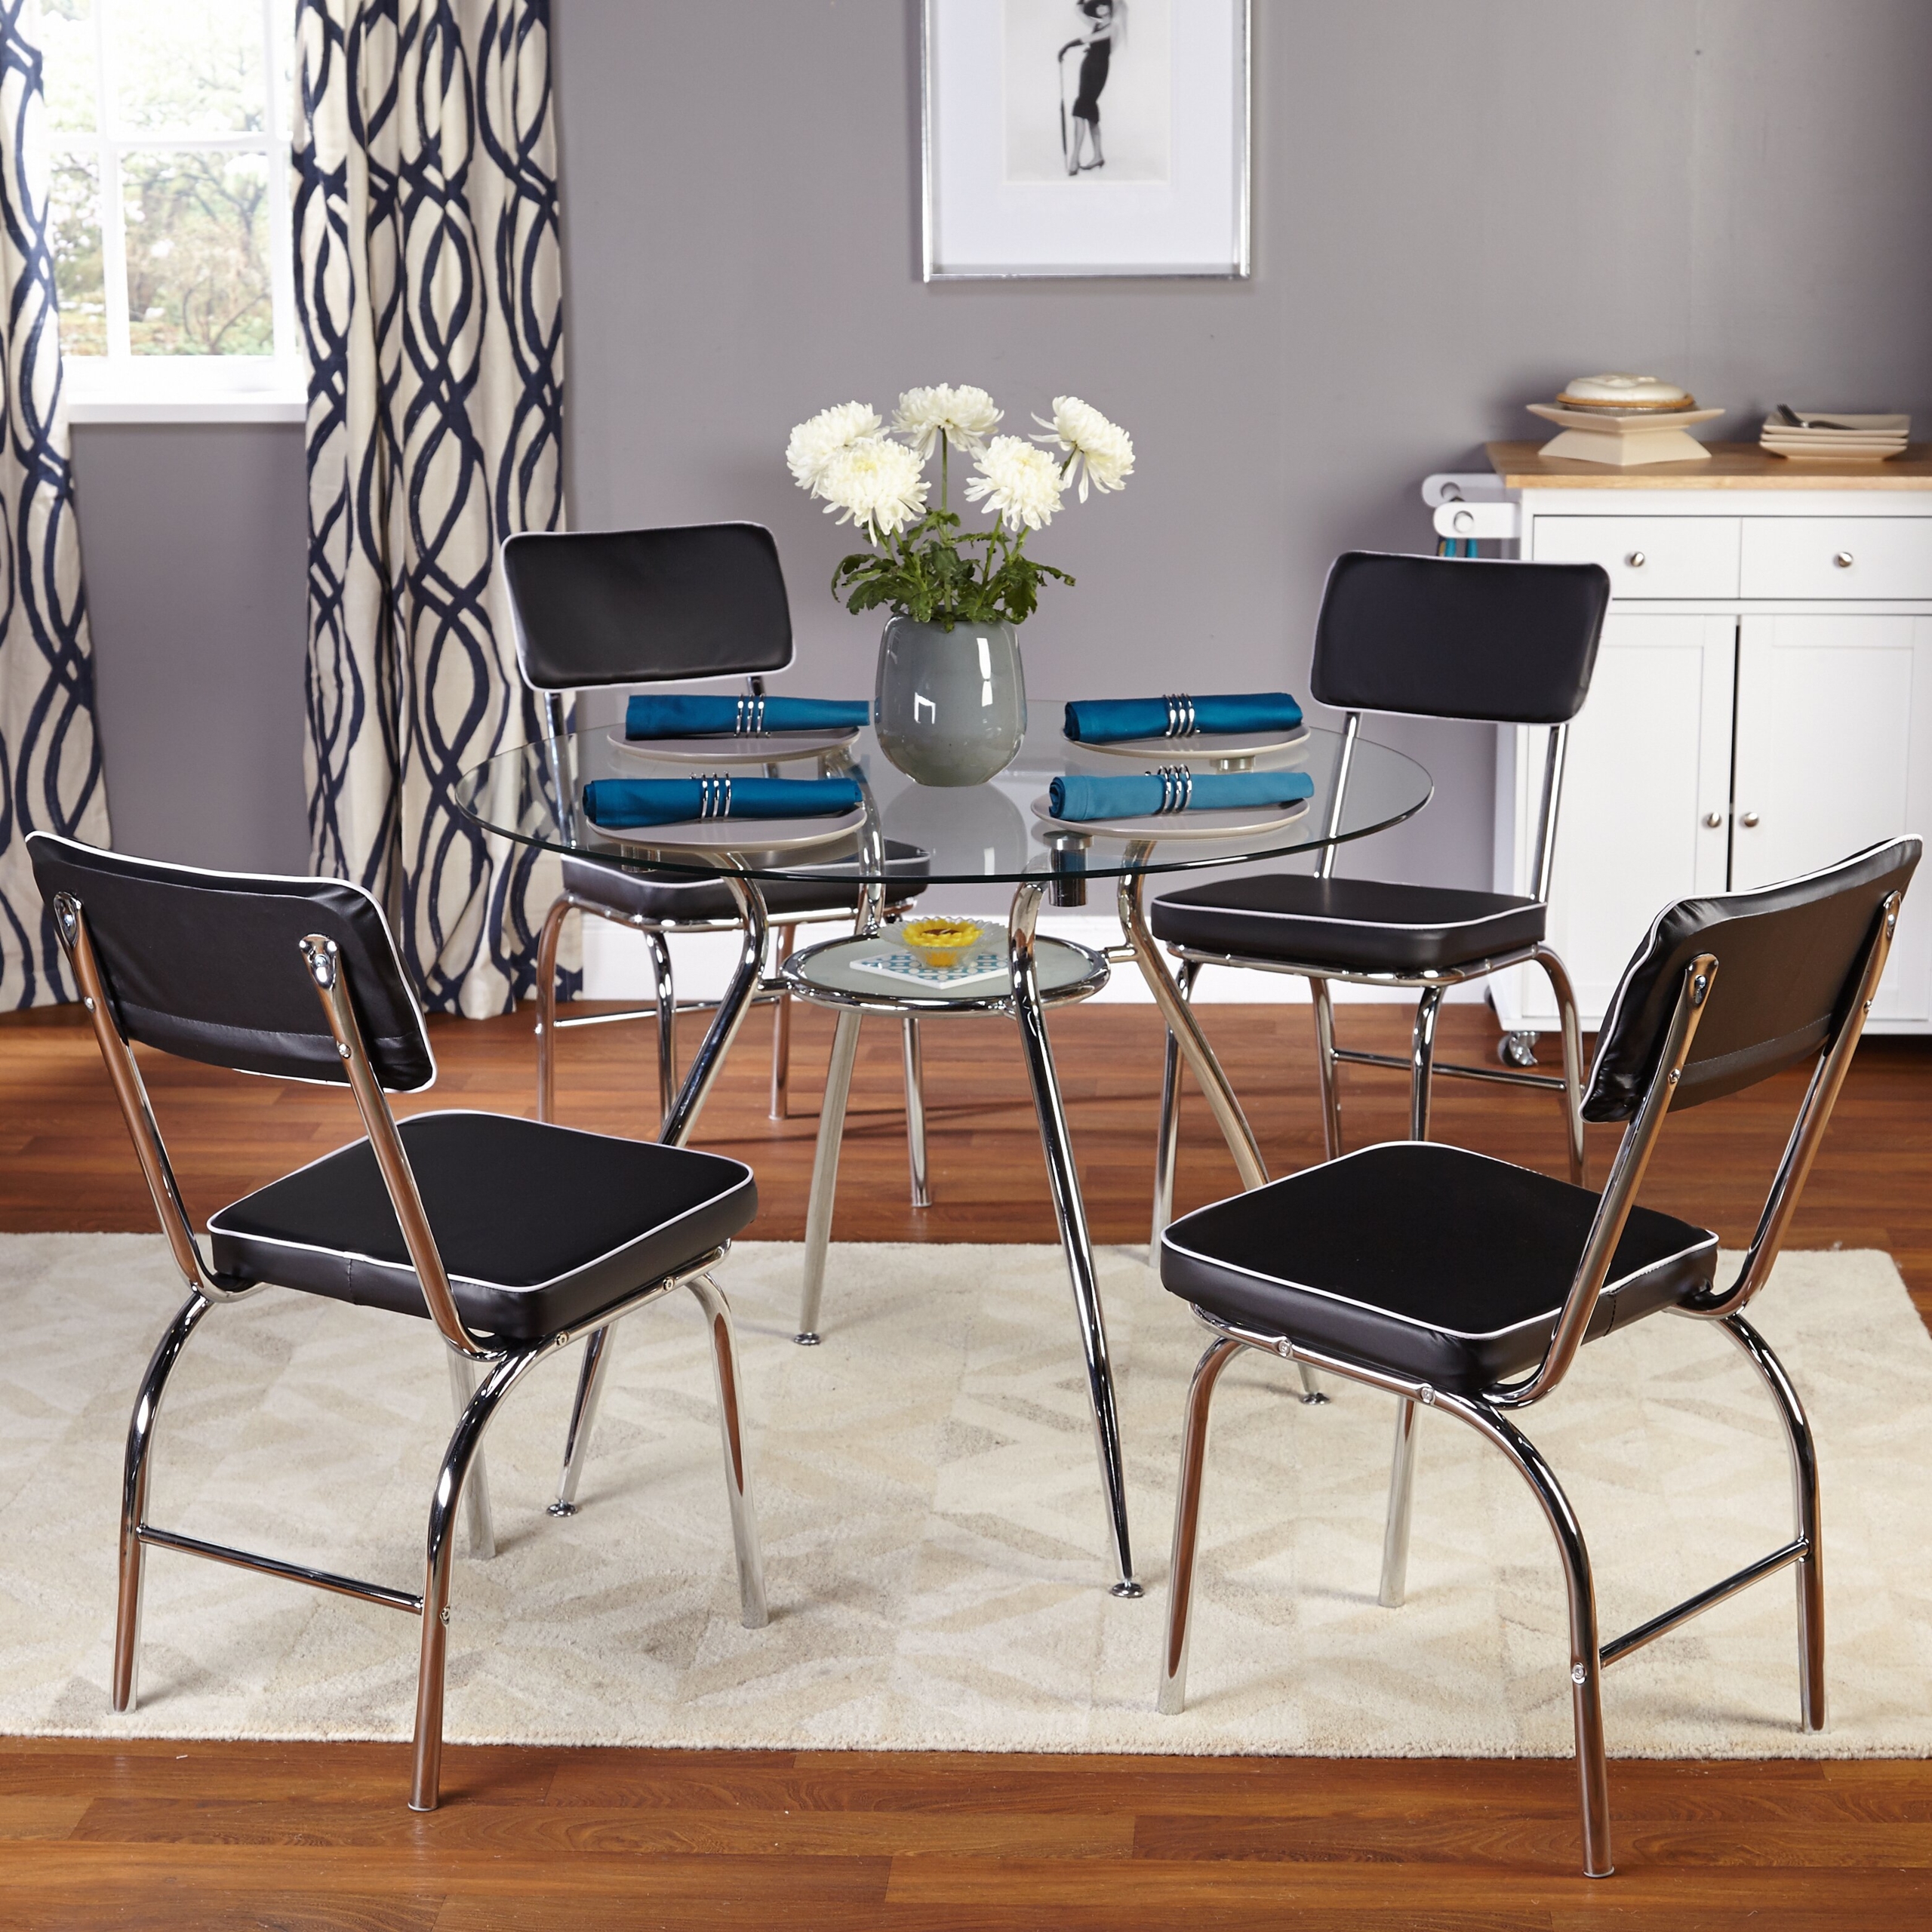 Mable 5 Piece Dining Set